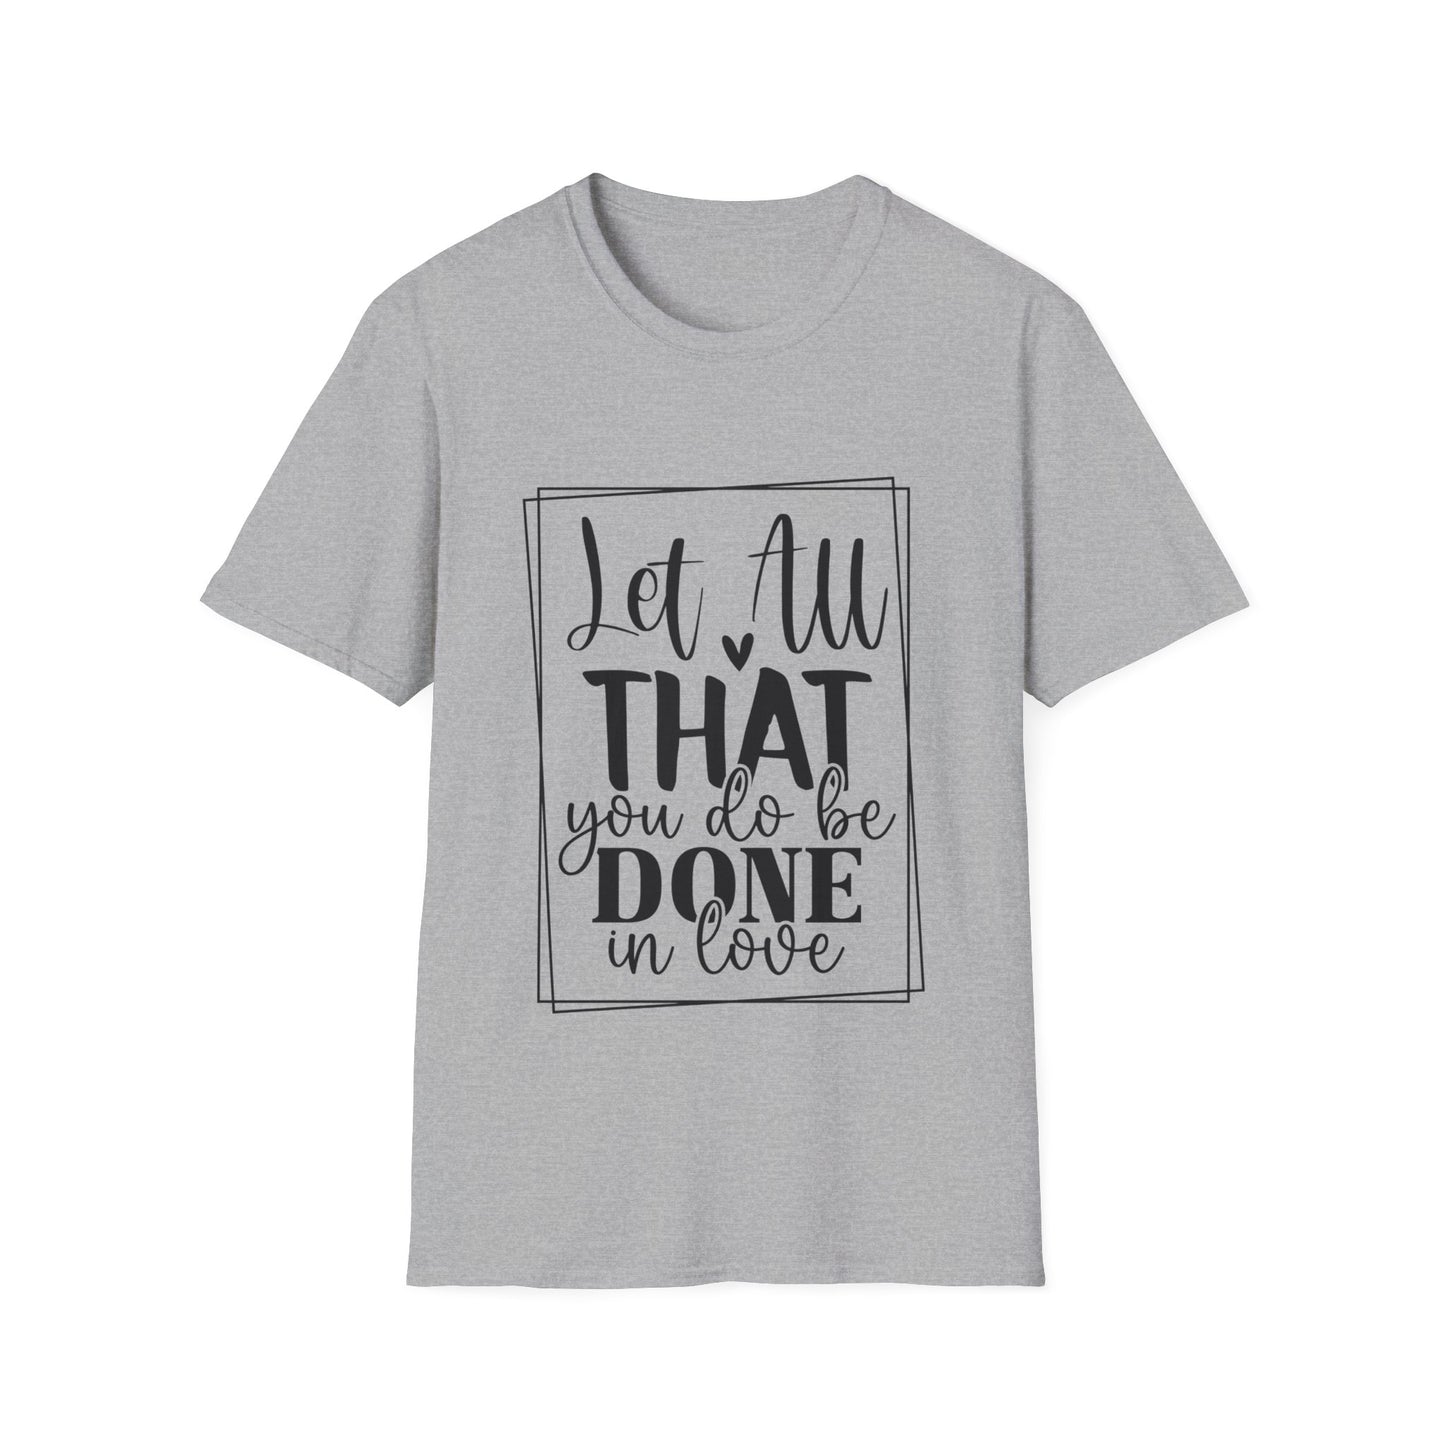 Let All That You Do Be Done In Love Triple Viking T-Shirt